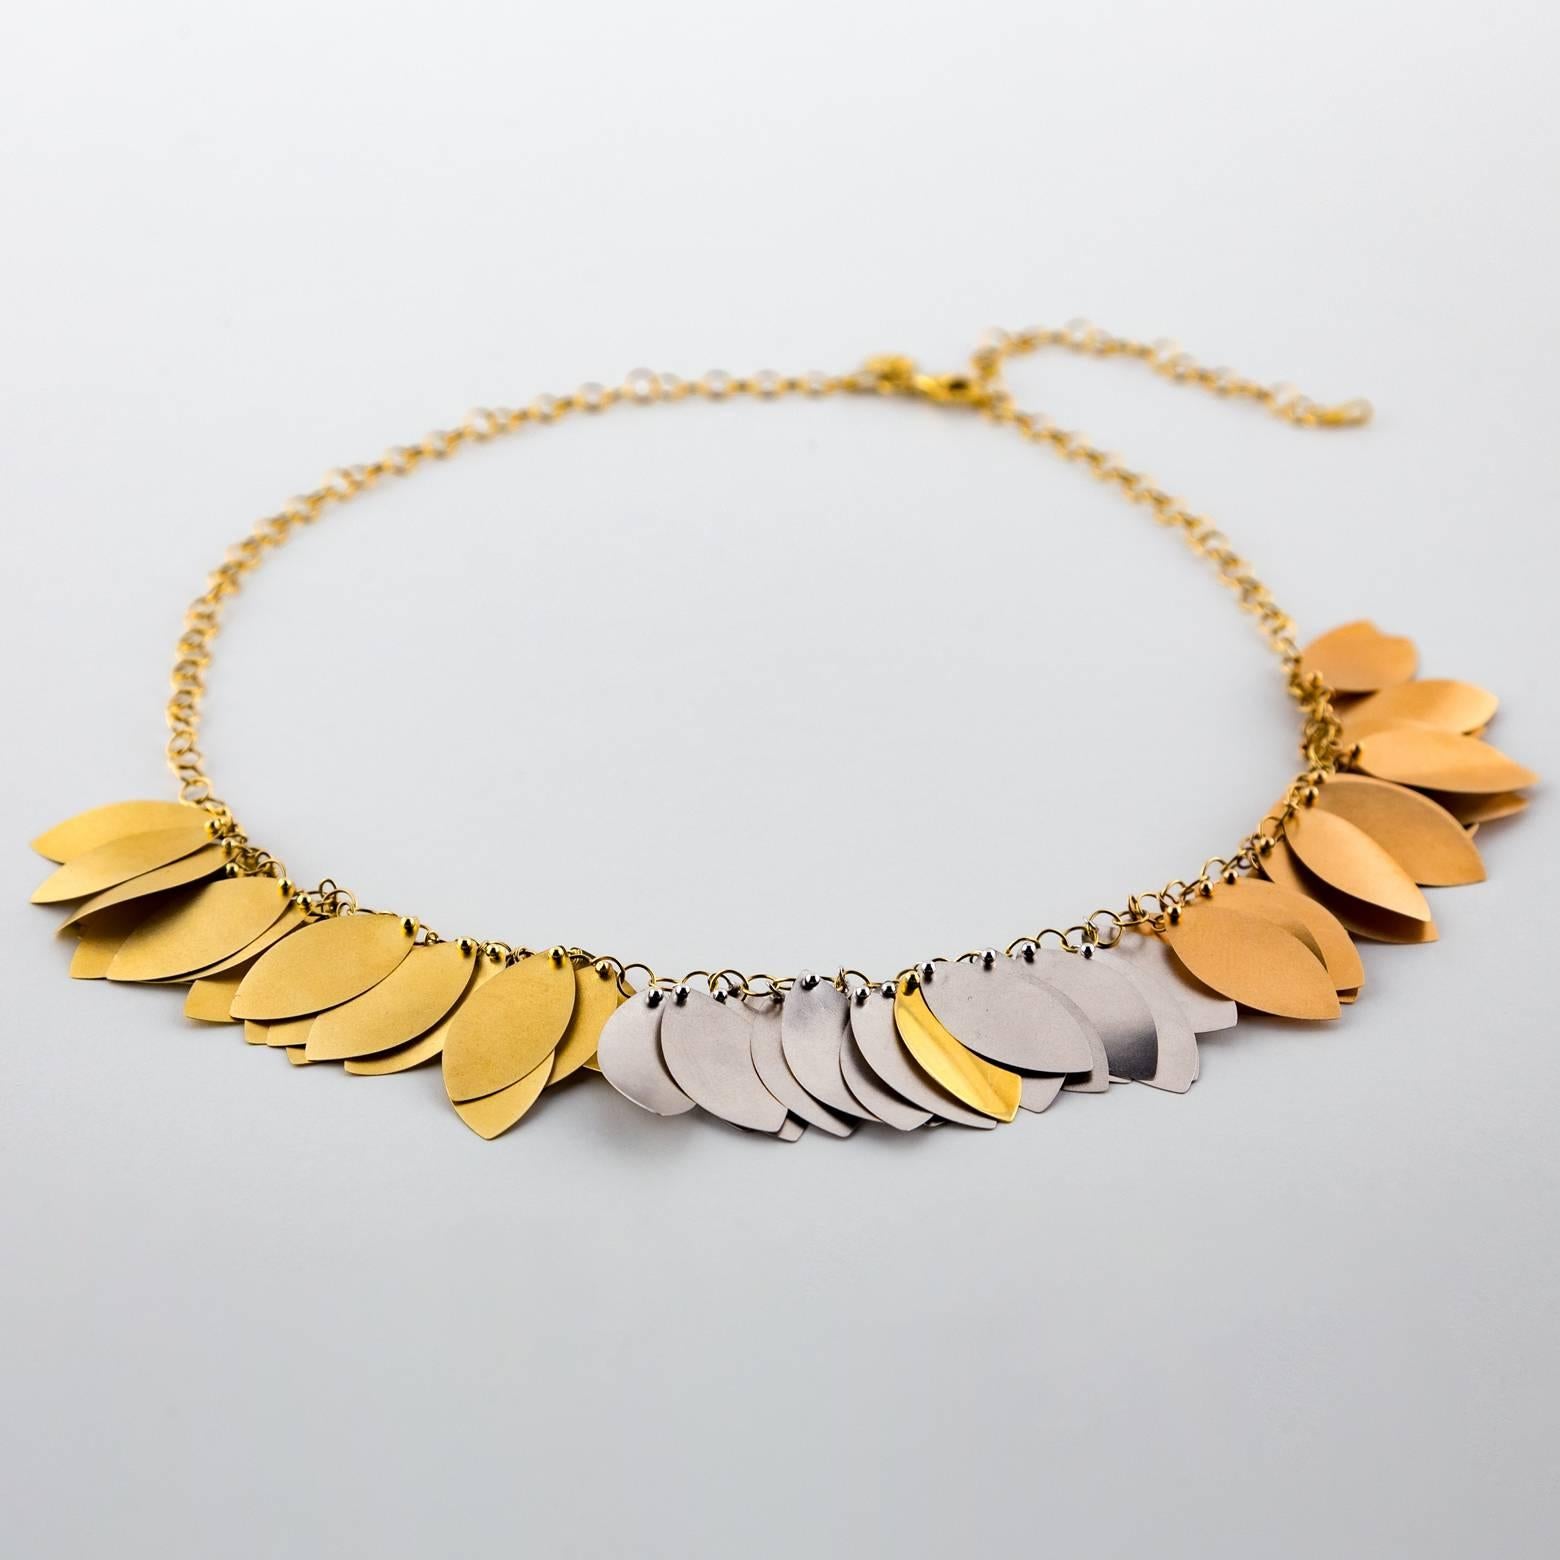 This beautiful golden leaf necklace has three shades of 18k gold and slightly twisted leaves. It dangles so elegantly and it lays around the neck as if blown by a slight breeze. The three shades of gold allow it to go with any outfit! 